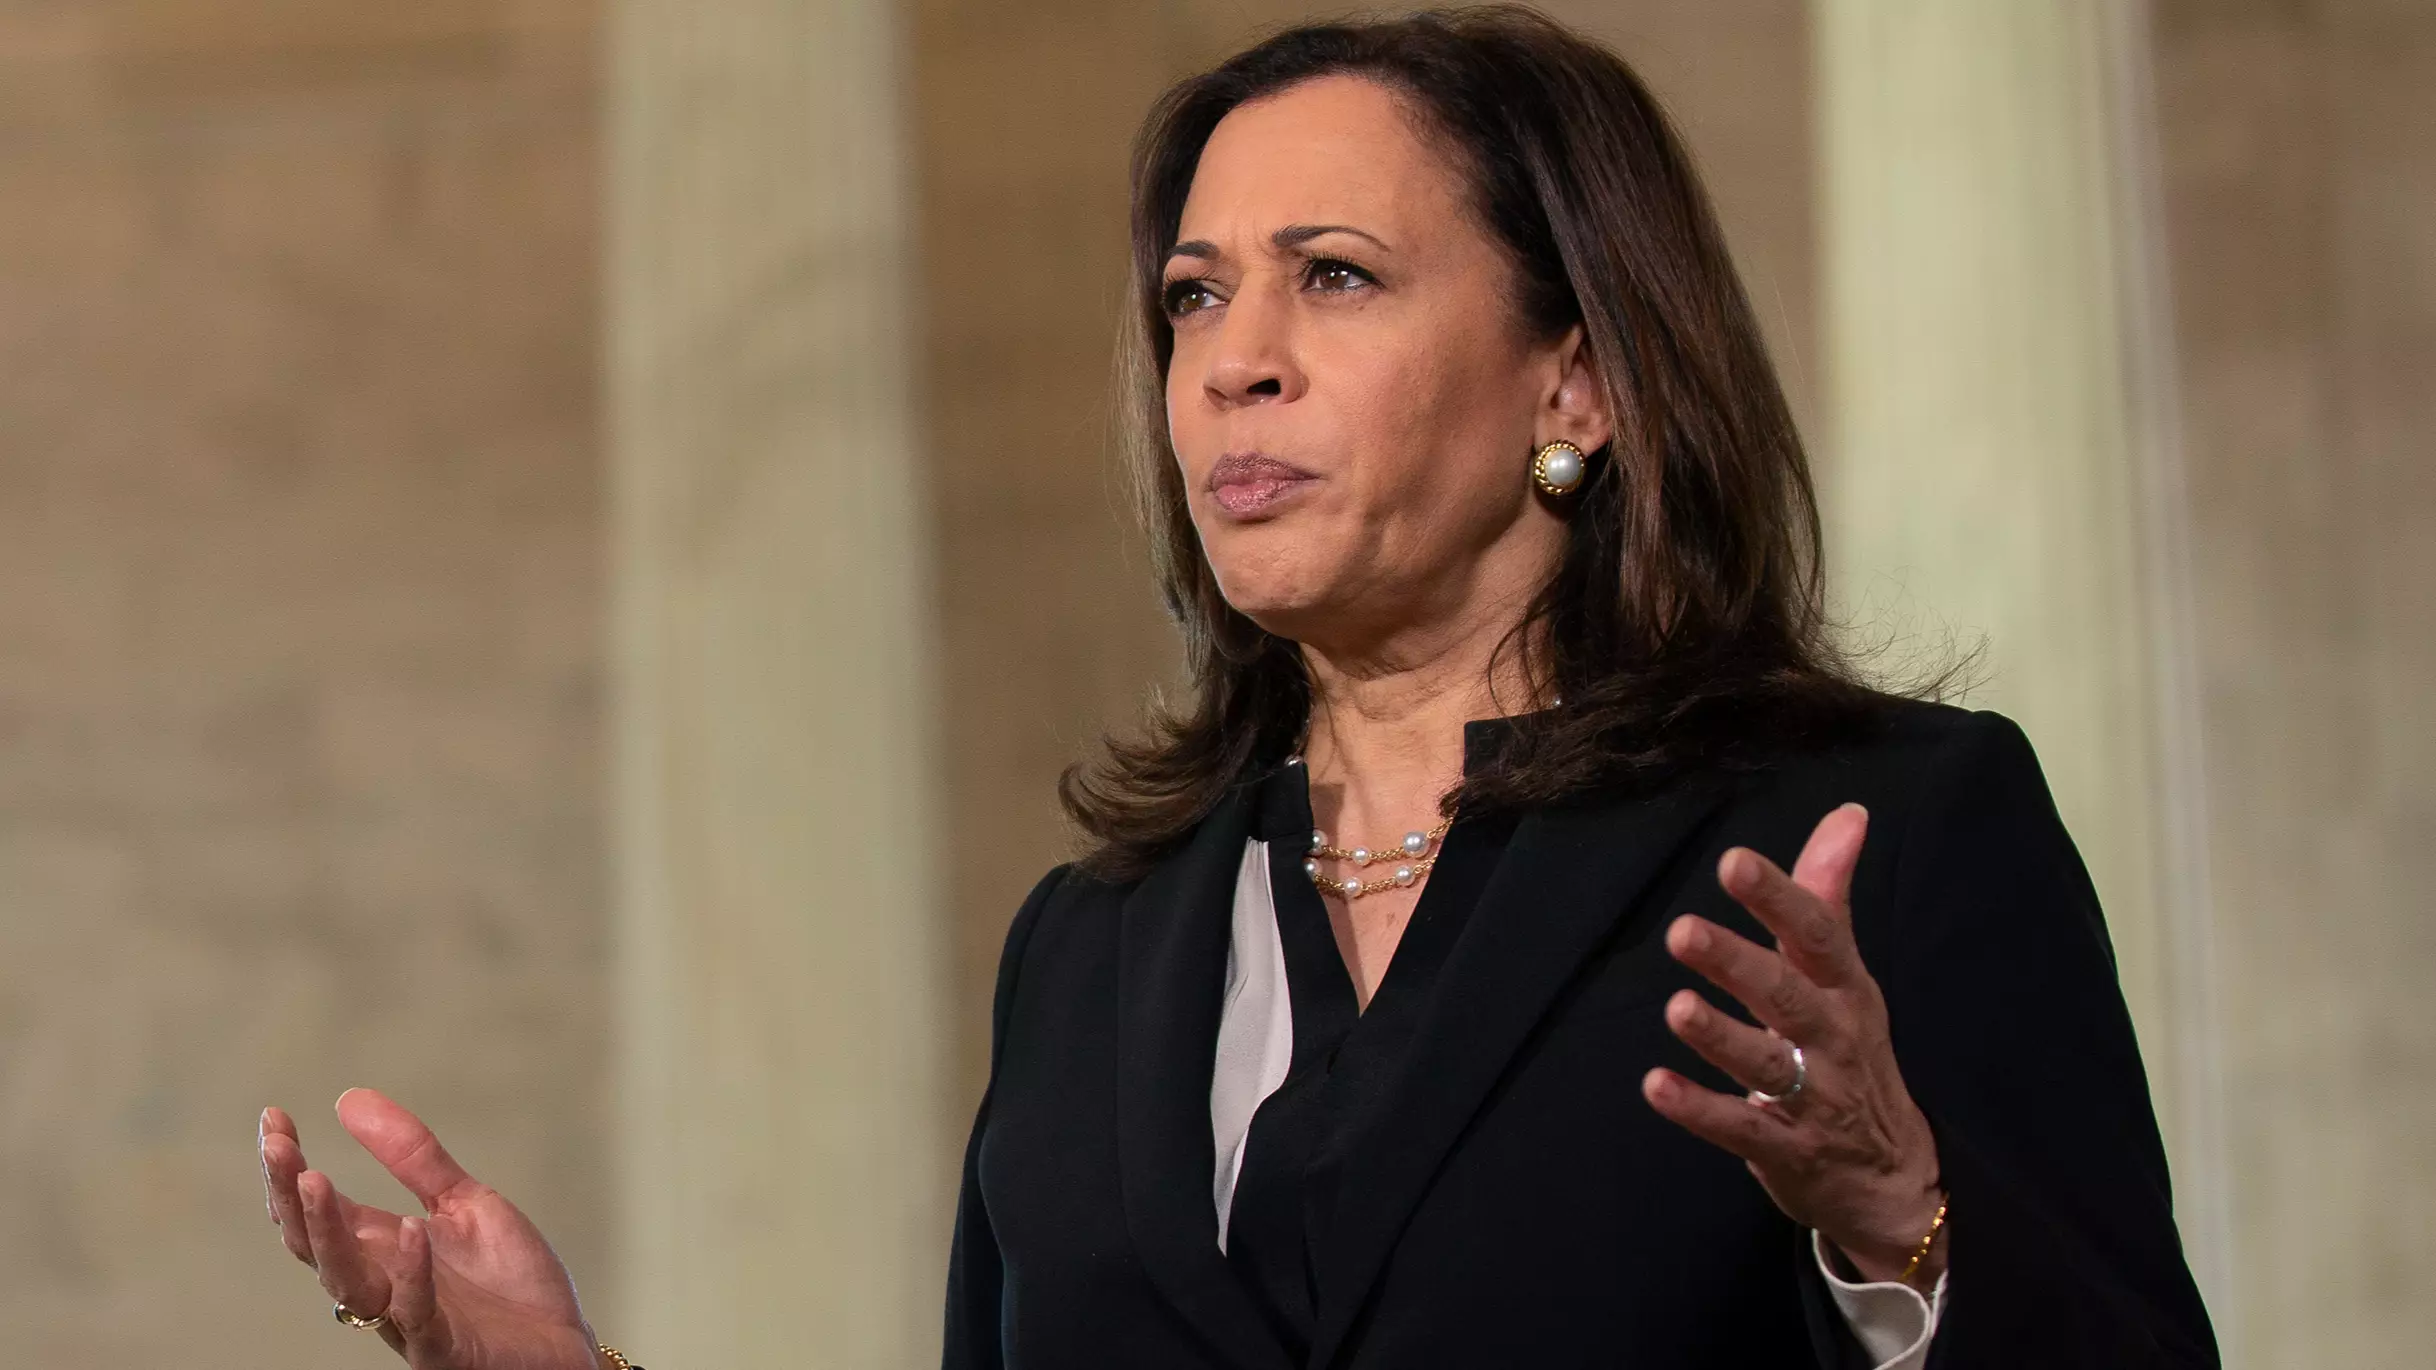 US Politician Claims Kamala Harris Could Be Impeached For Her Support Of BLM Protests